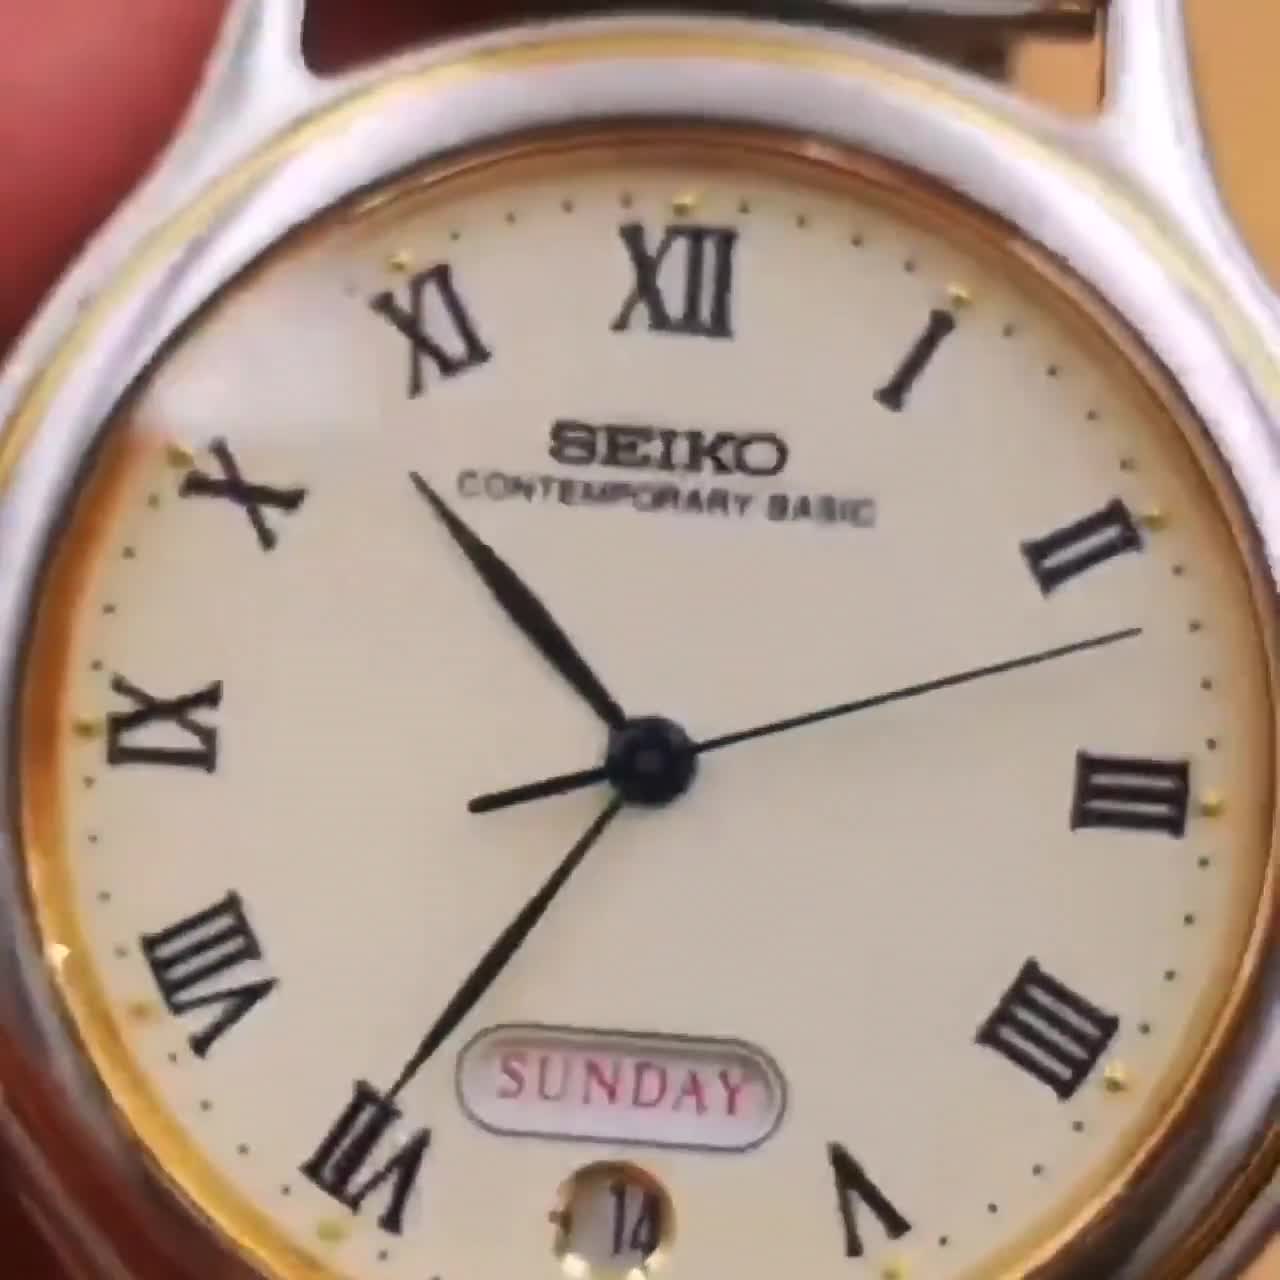 Vintage and Rare Seiko Contemporary Basic Watch. - Etsy